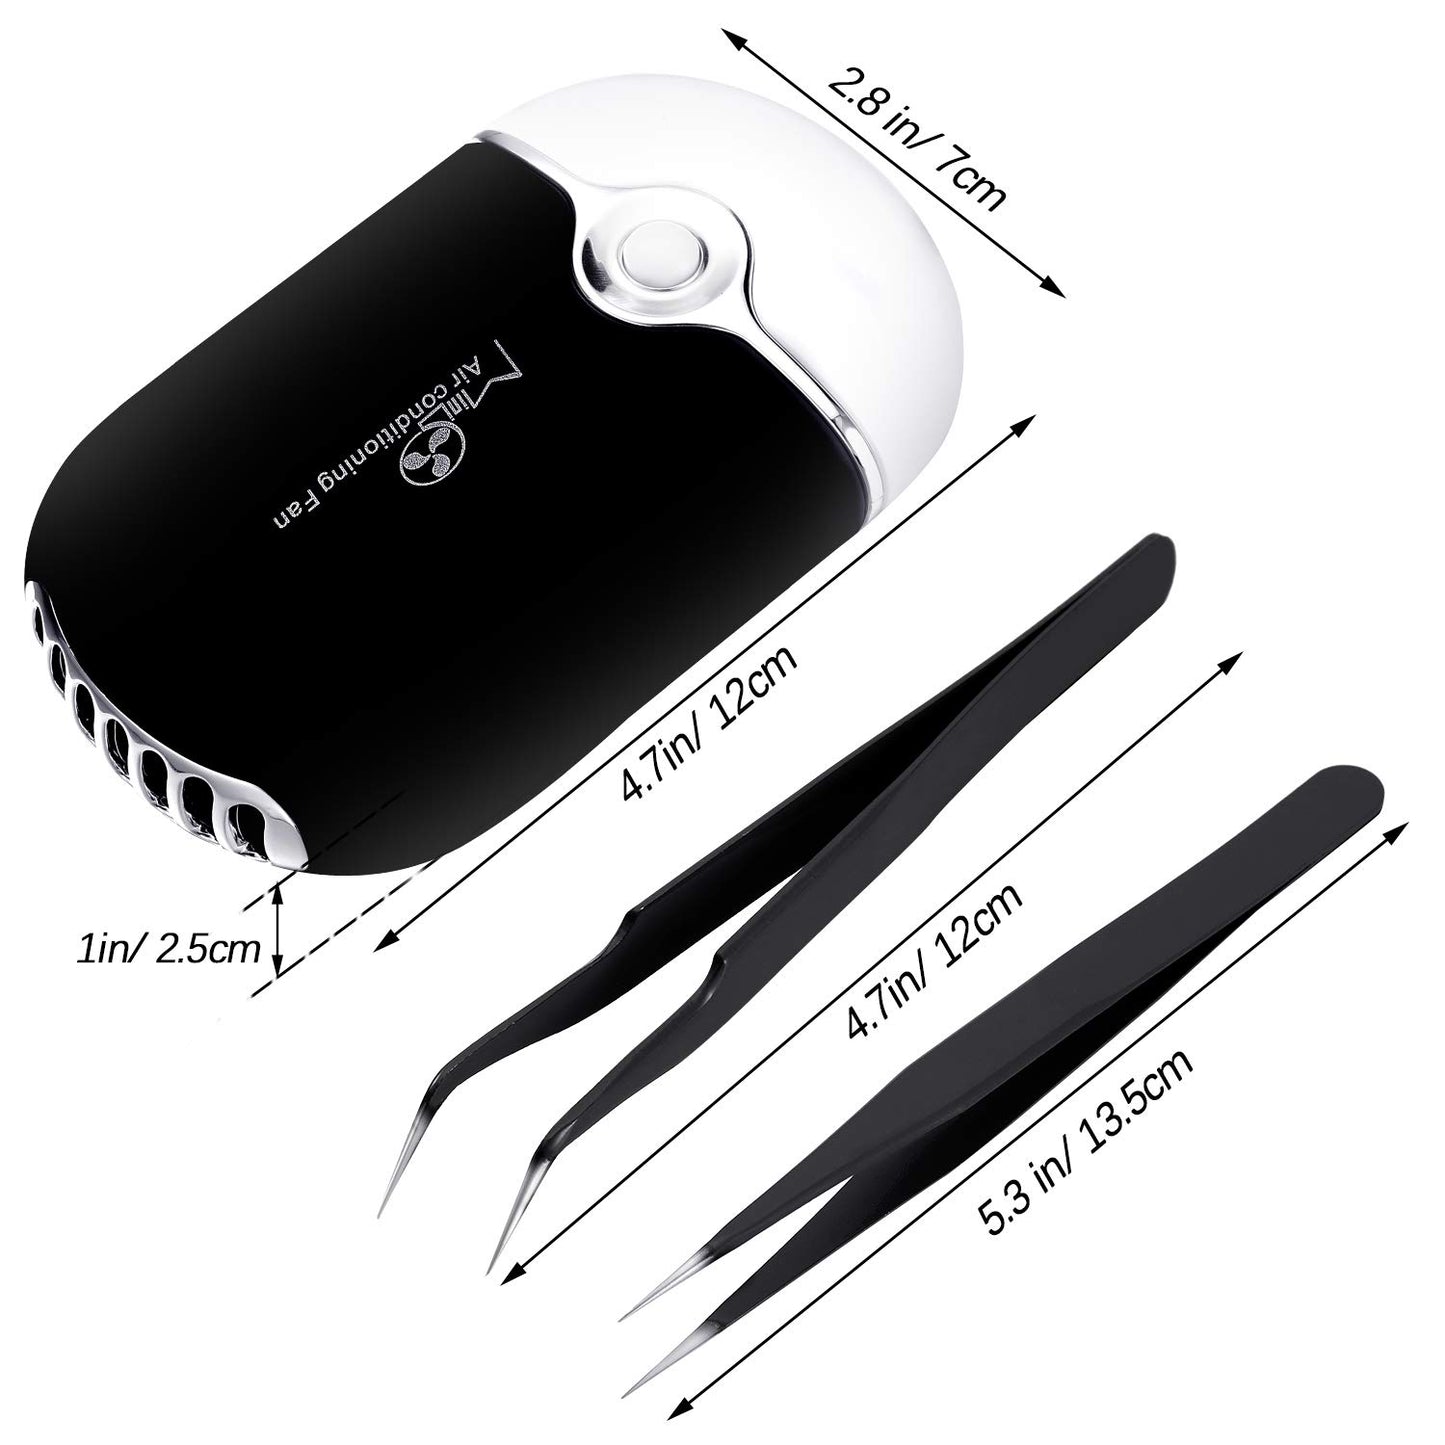 USB Air Conditioning Blower Handheld Eyelash Fan Dryer Rechargeable Eyelashes Dryer Fan Mini Portable Fans with 2 Pieces Straight and Curved Tweezers for Eyelash Extensions Girls Women (Black)